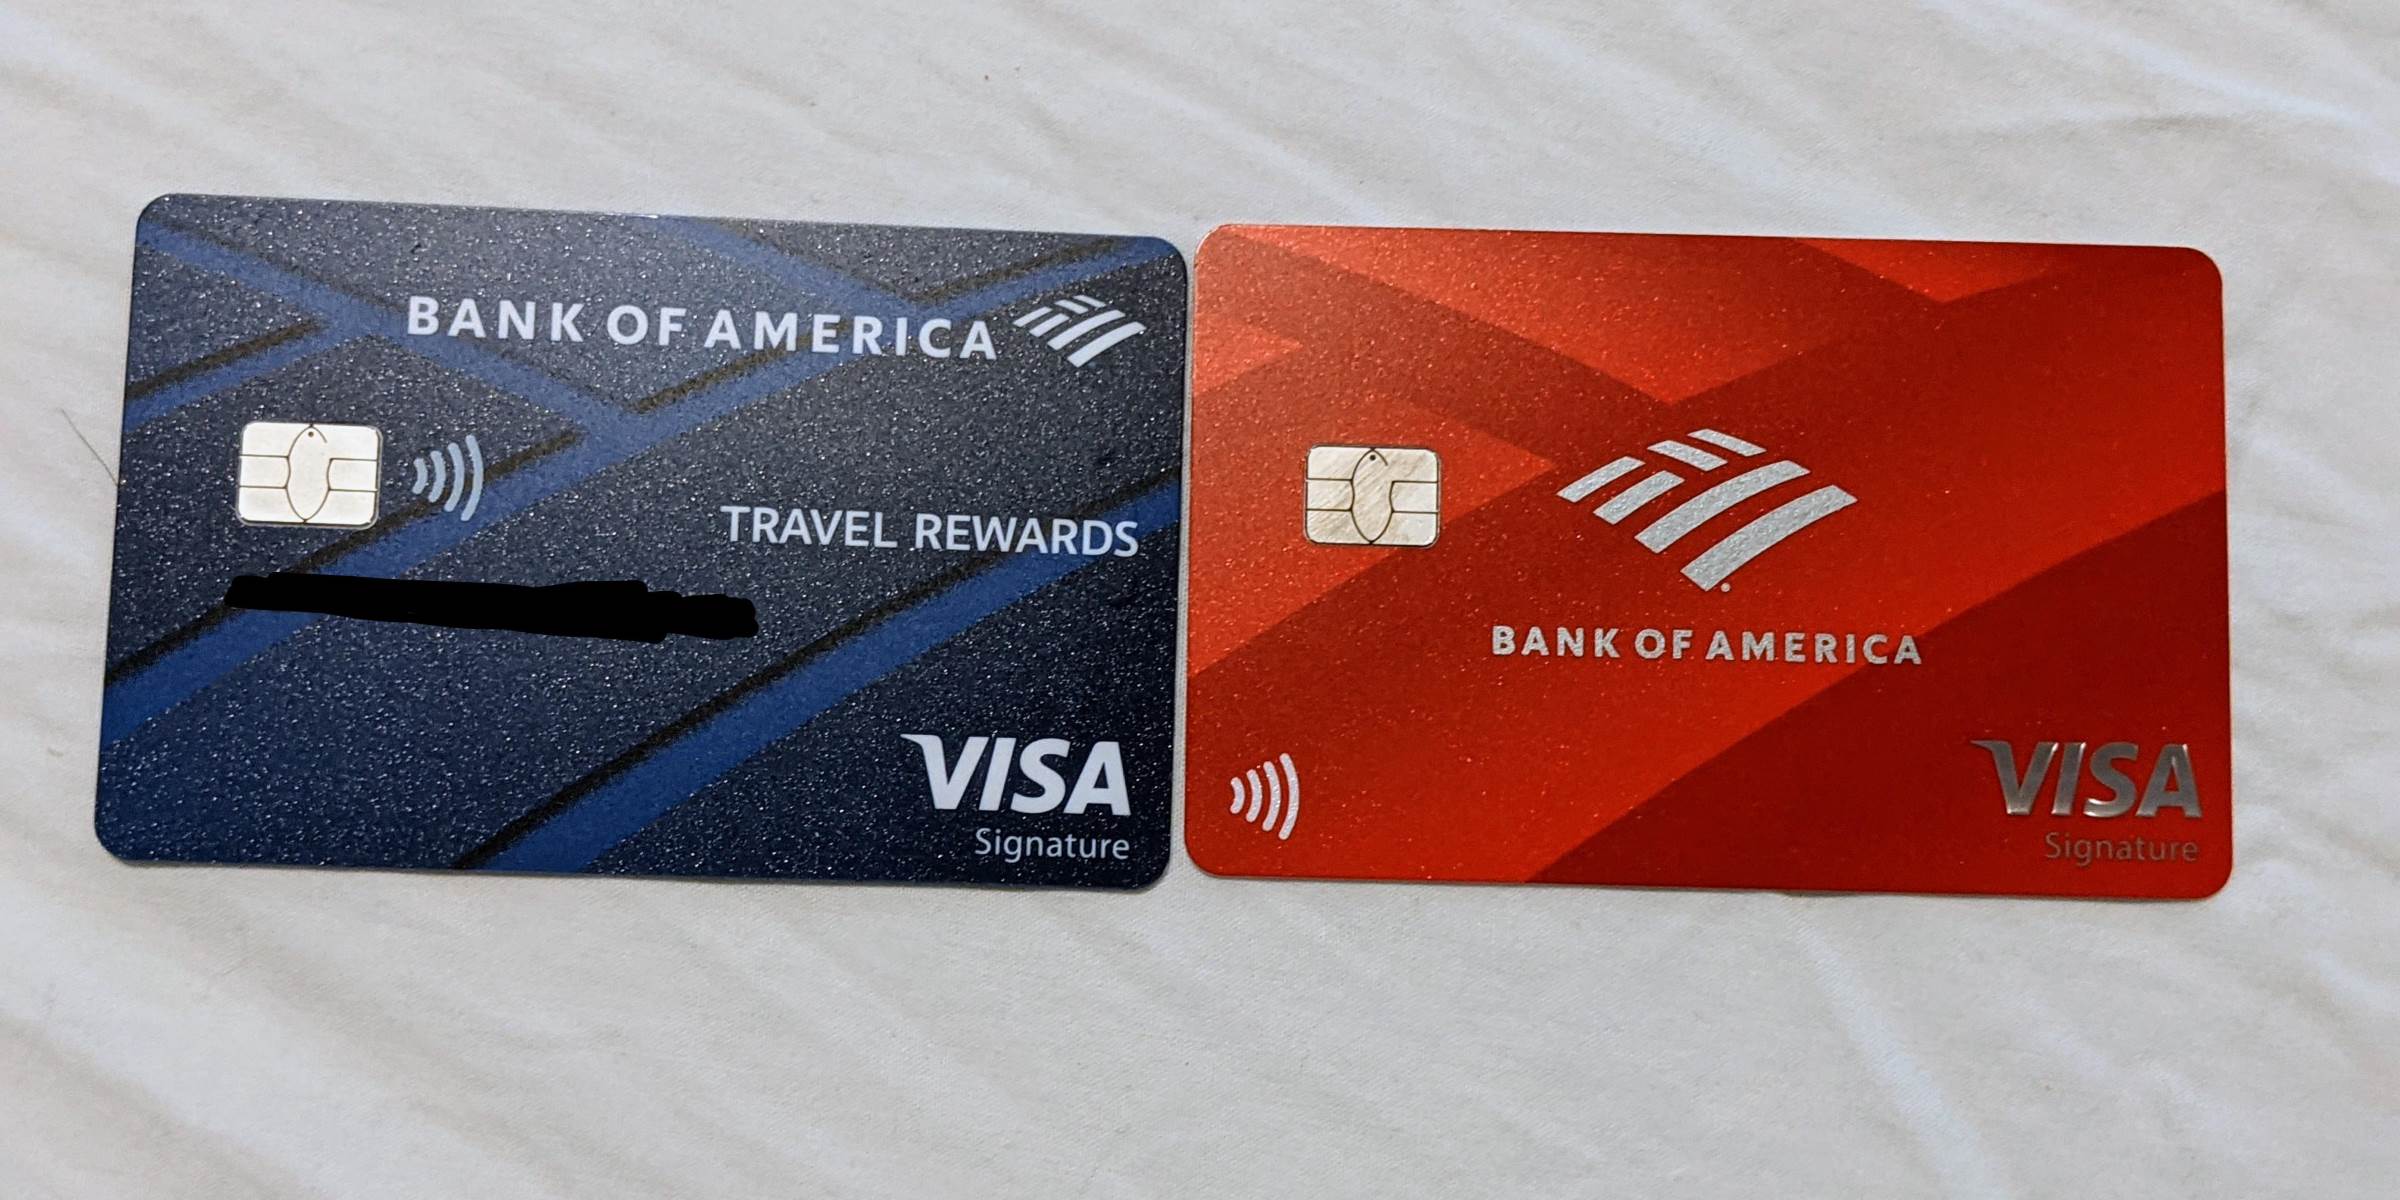 How To Change Due Date On Bank Of America Credit Card